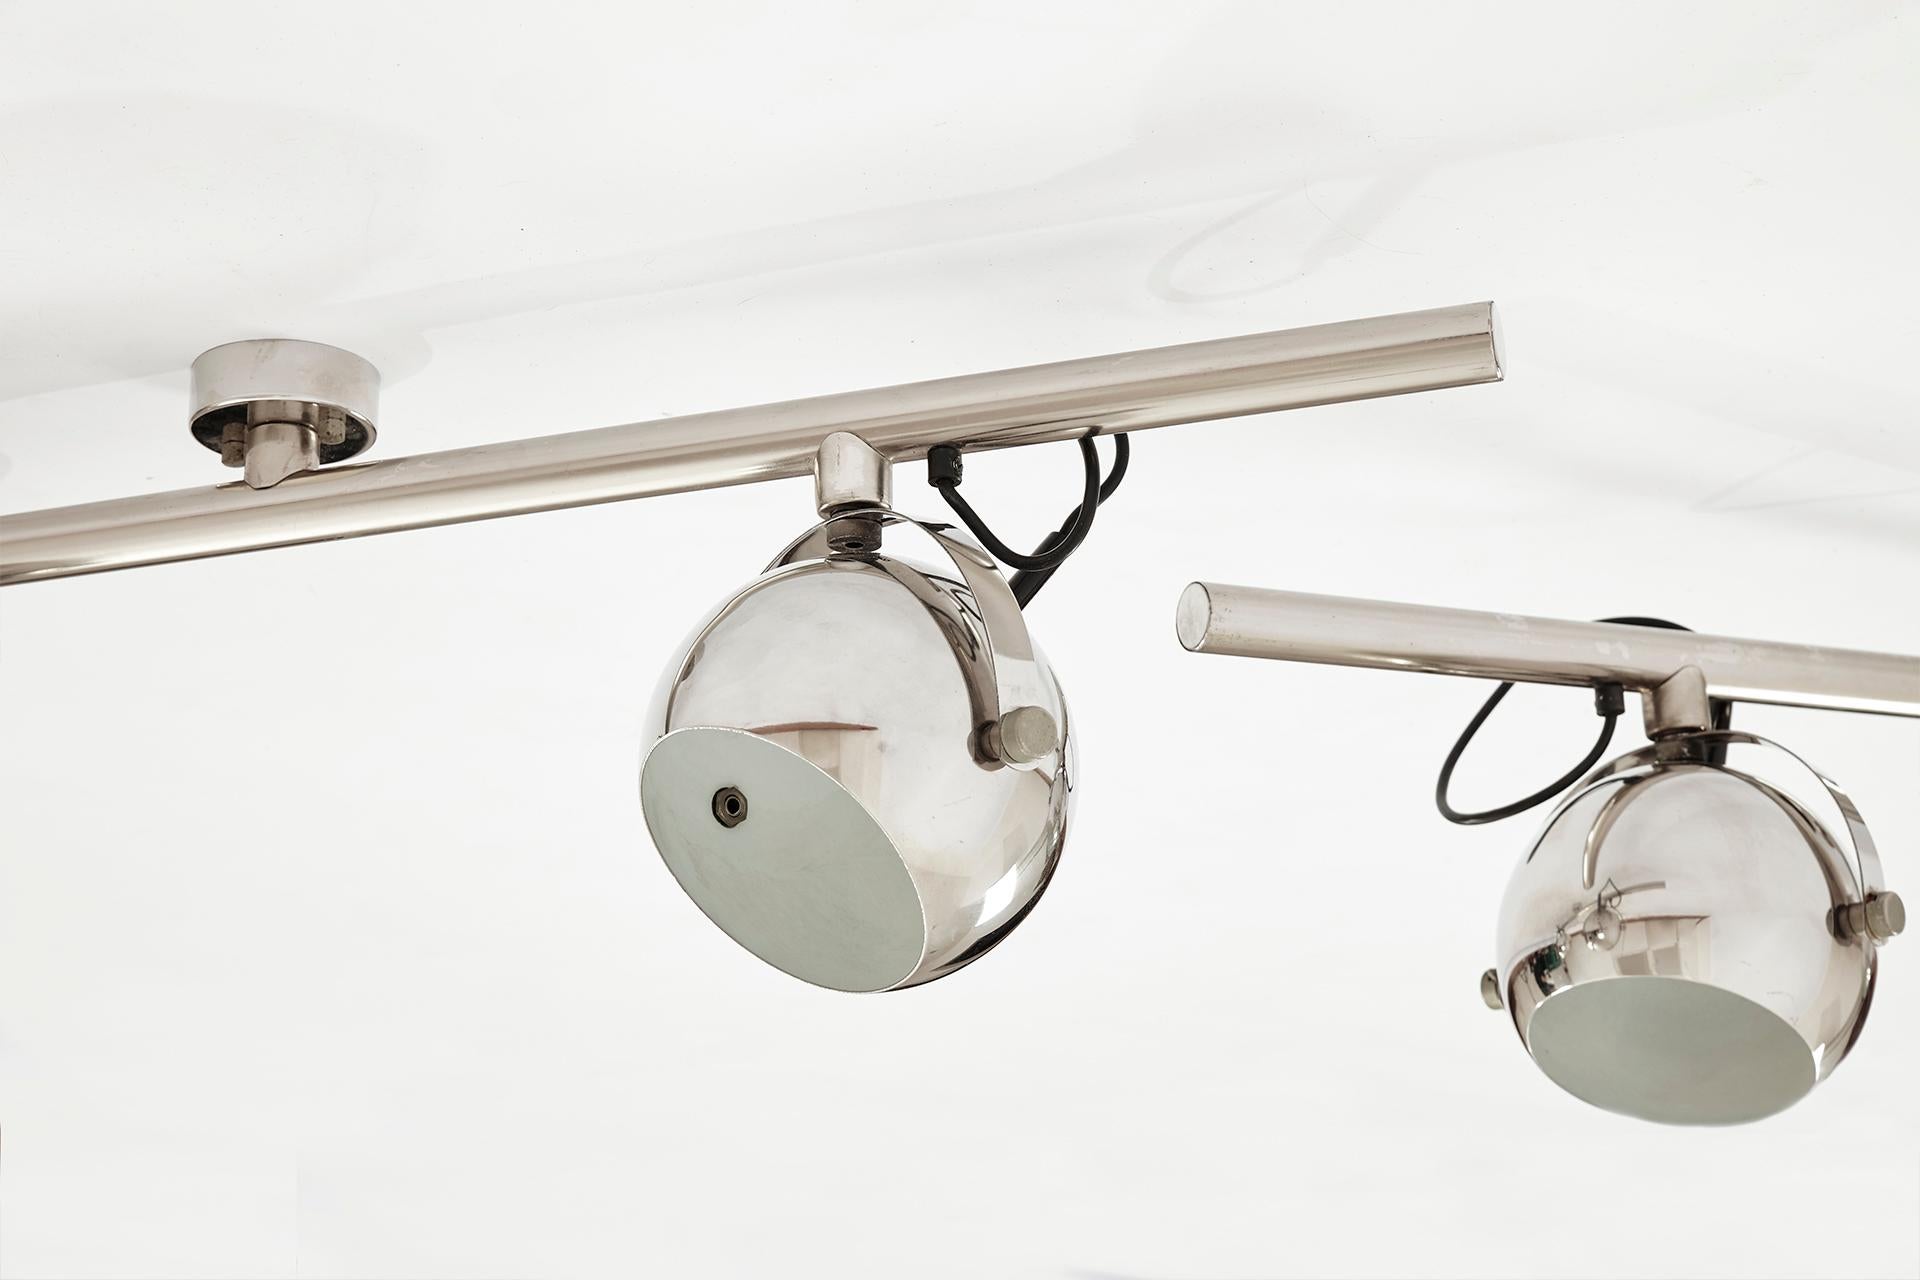 Set of two identical spherical ceiling lamps by manufacturer Simon & Schelle, 1970s.